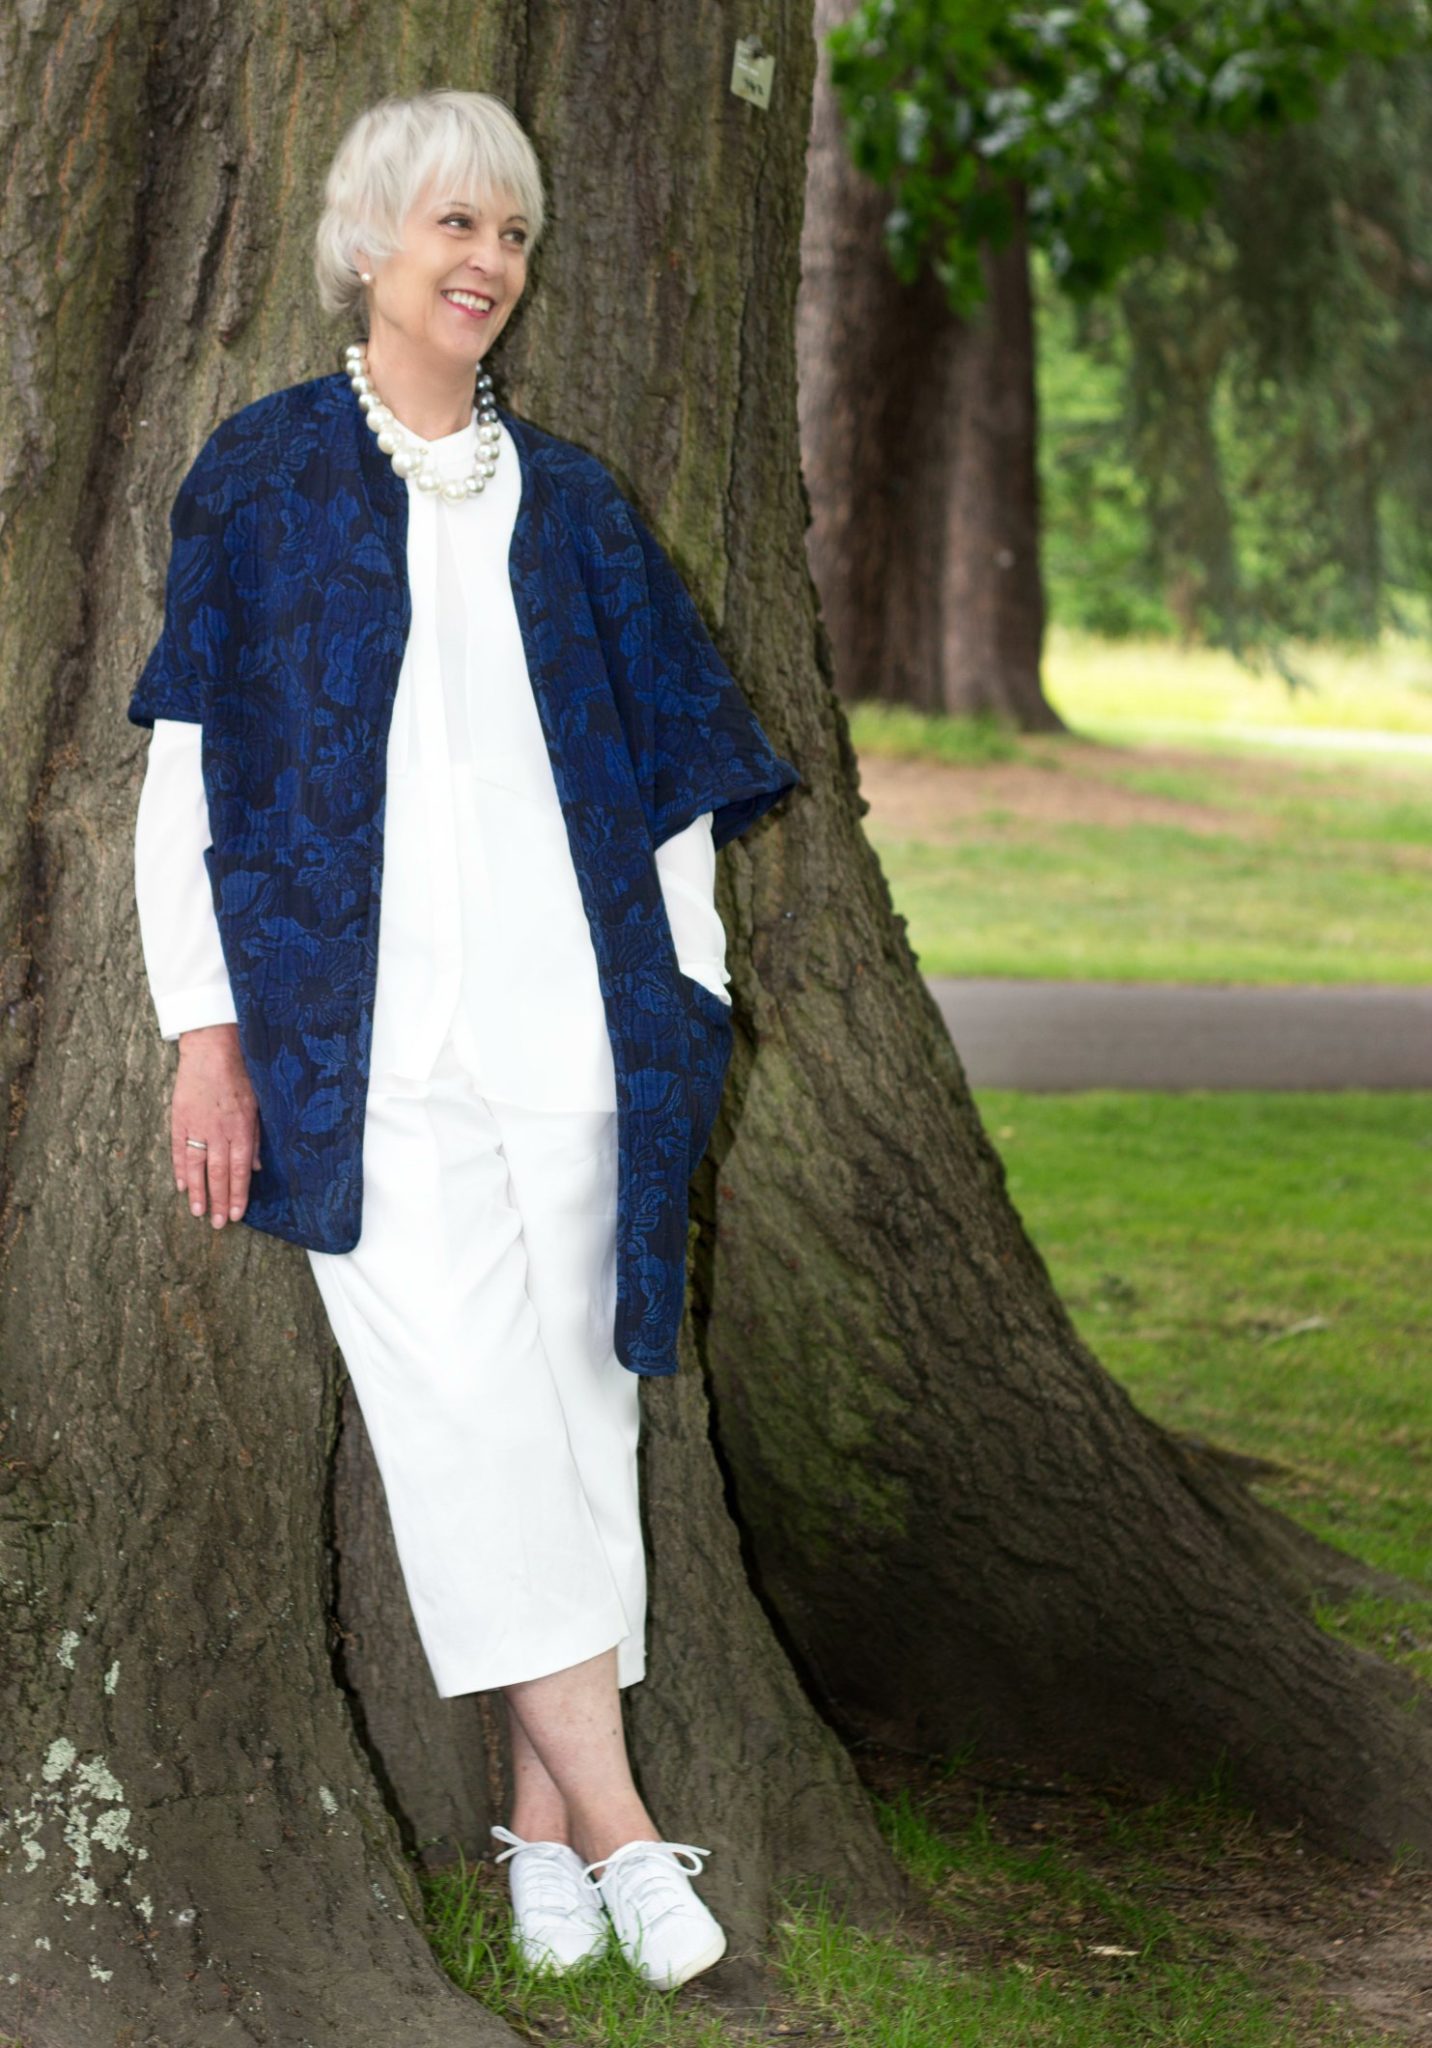 Navy plus cream/winning style combination - Chic at any age